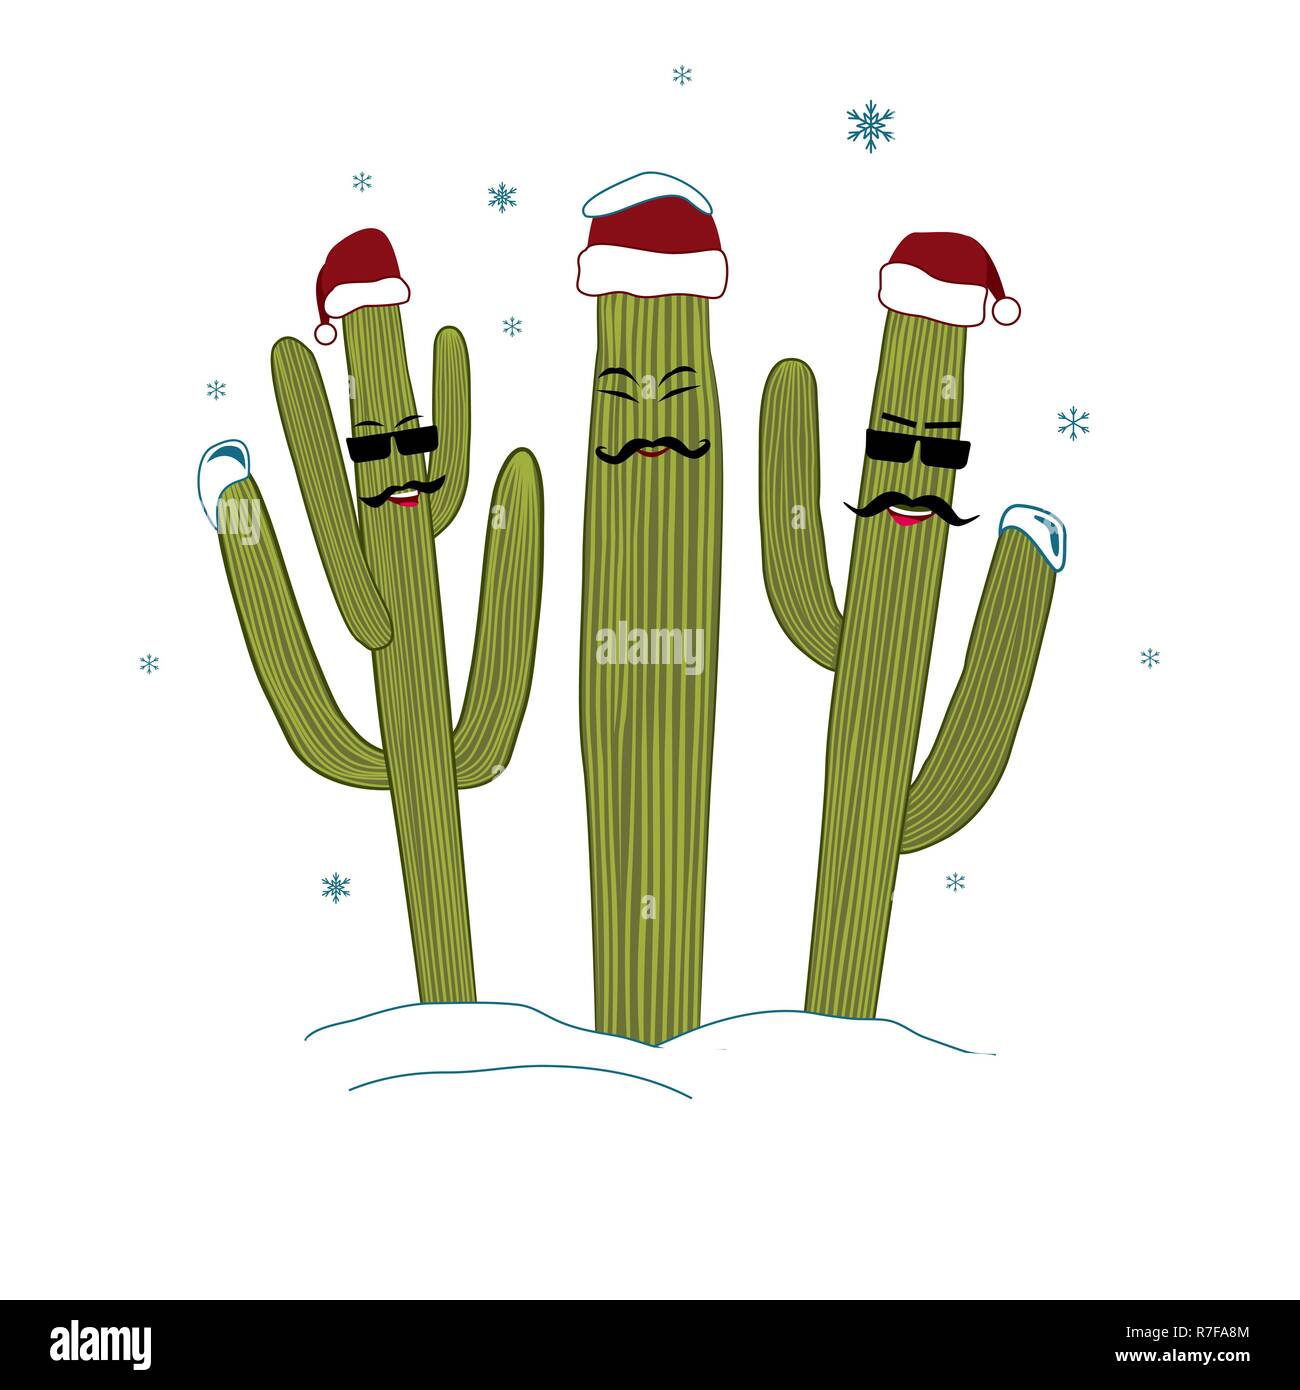 Three Christmas Saguaro Cactuses. Winter in tropical climate concept. Three cacti friend in Santa Hats. Stock Vector